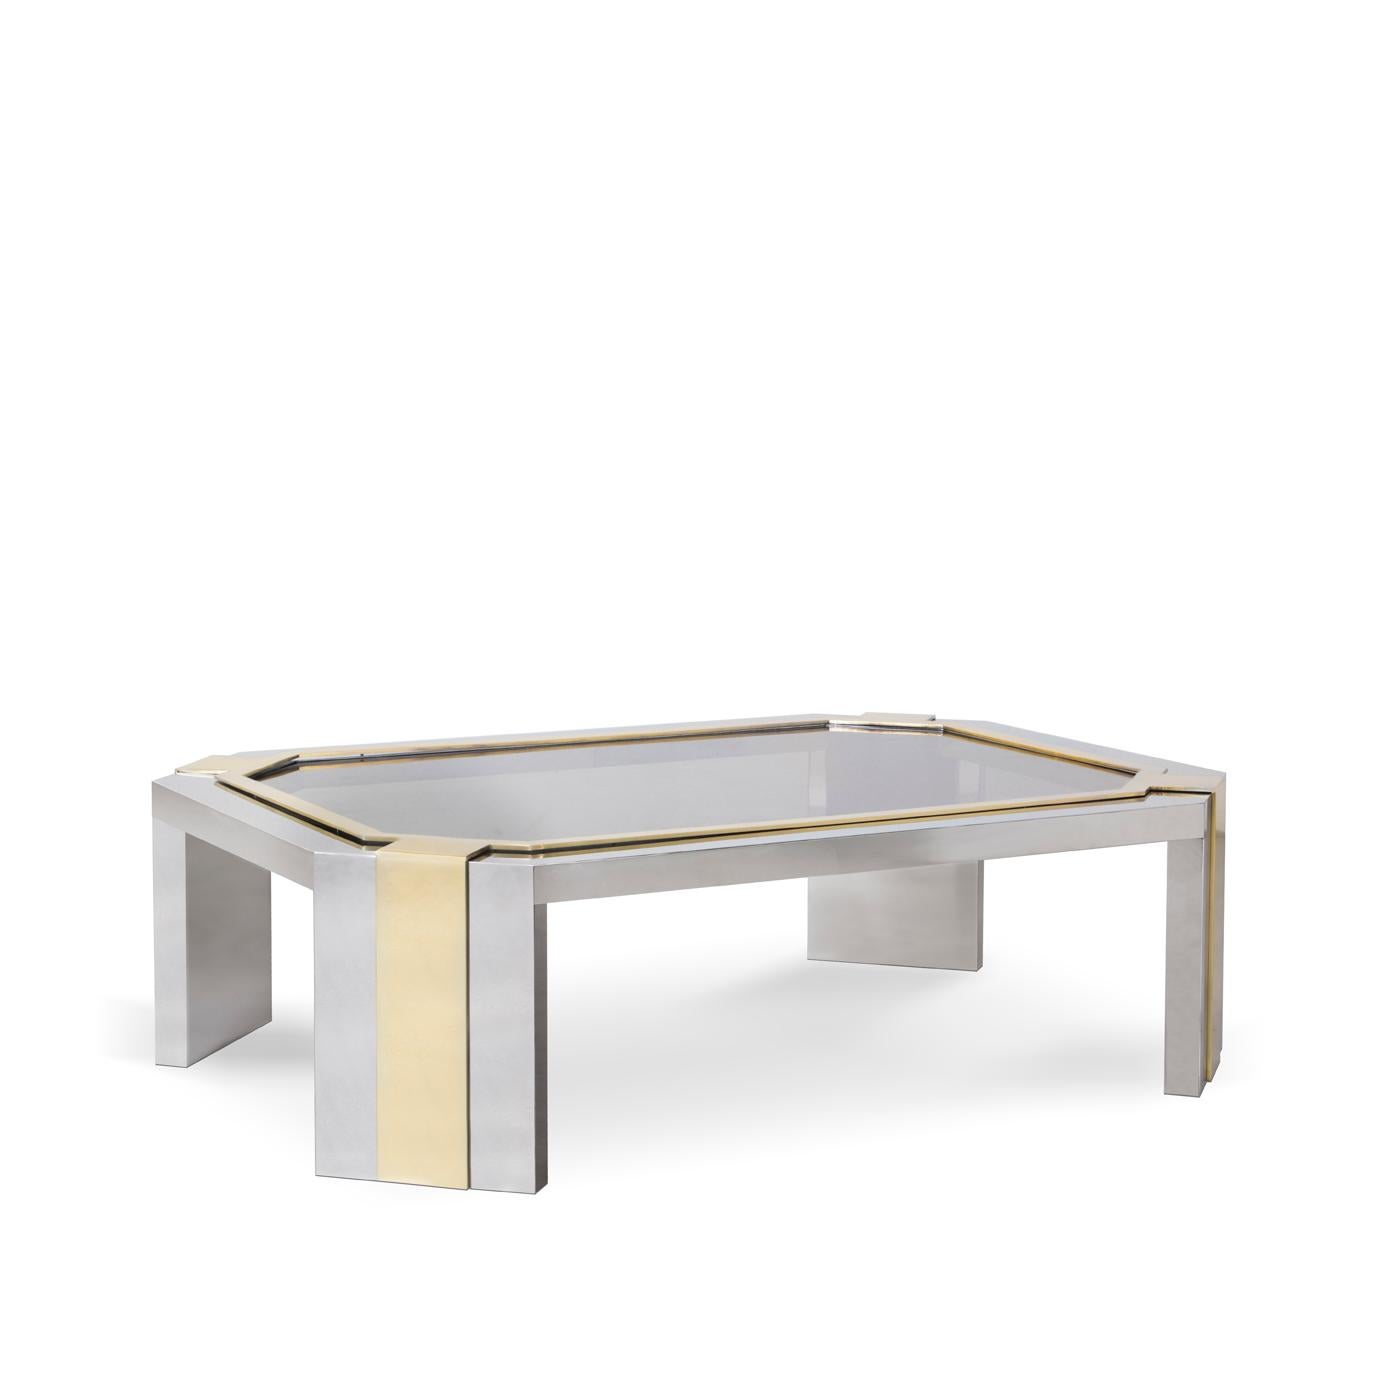 You won't be able to refuse the allure of the Minx coffee table. Her structured geometric frame is coupled with an exotic blend of metals and a mirrored top, capturing the awe and desire of her many admirers.